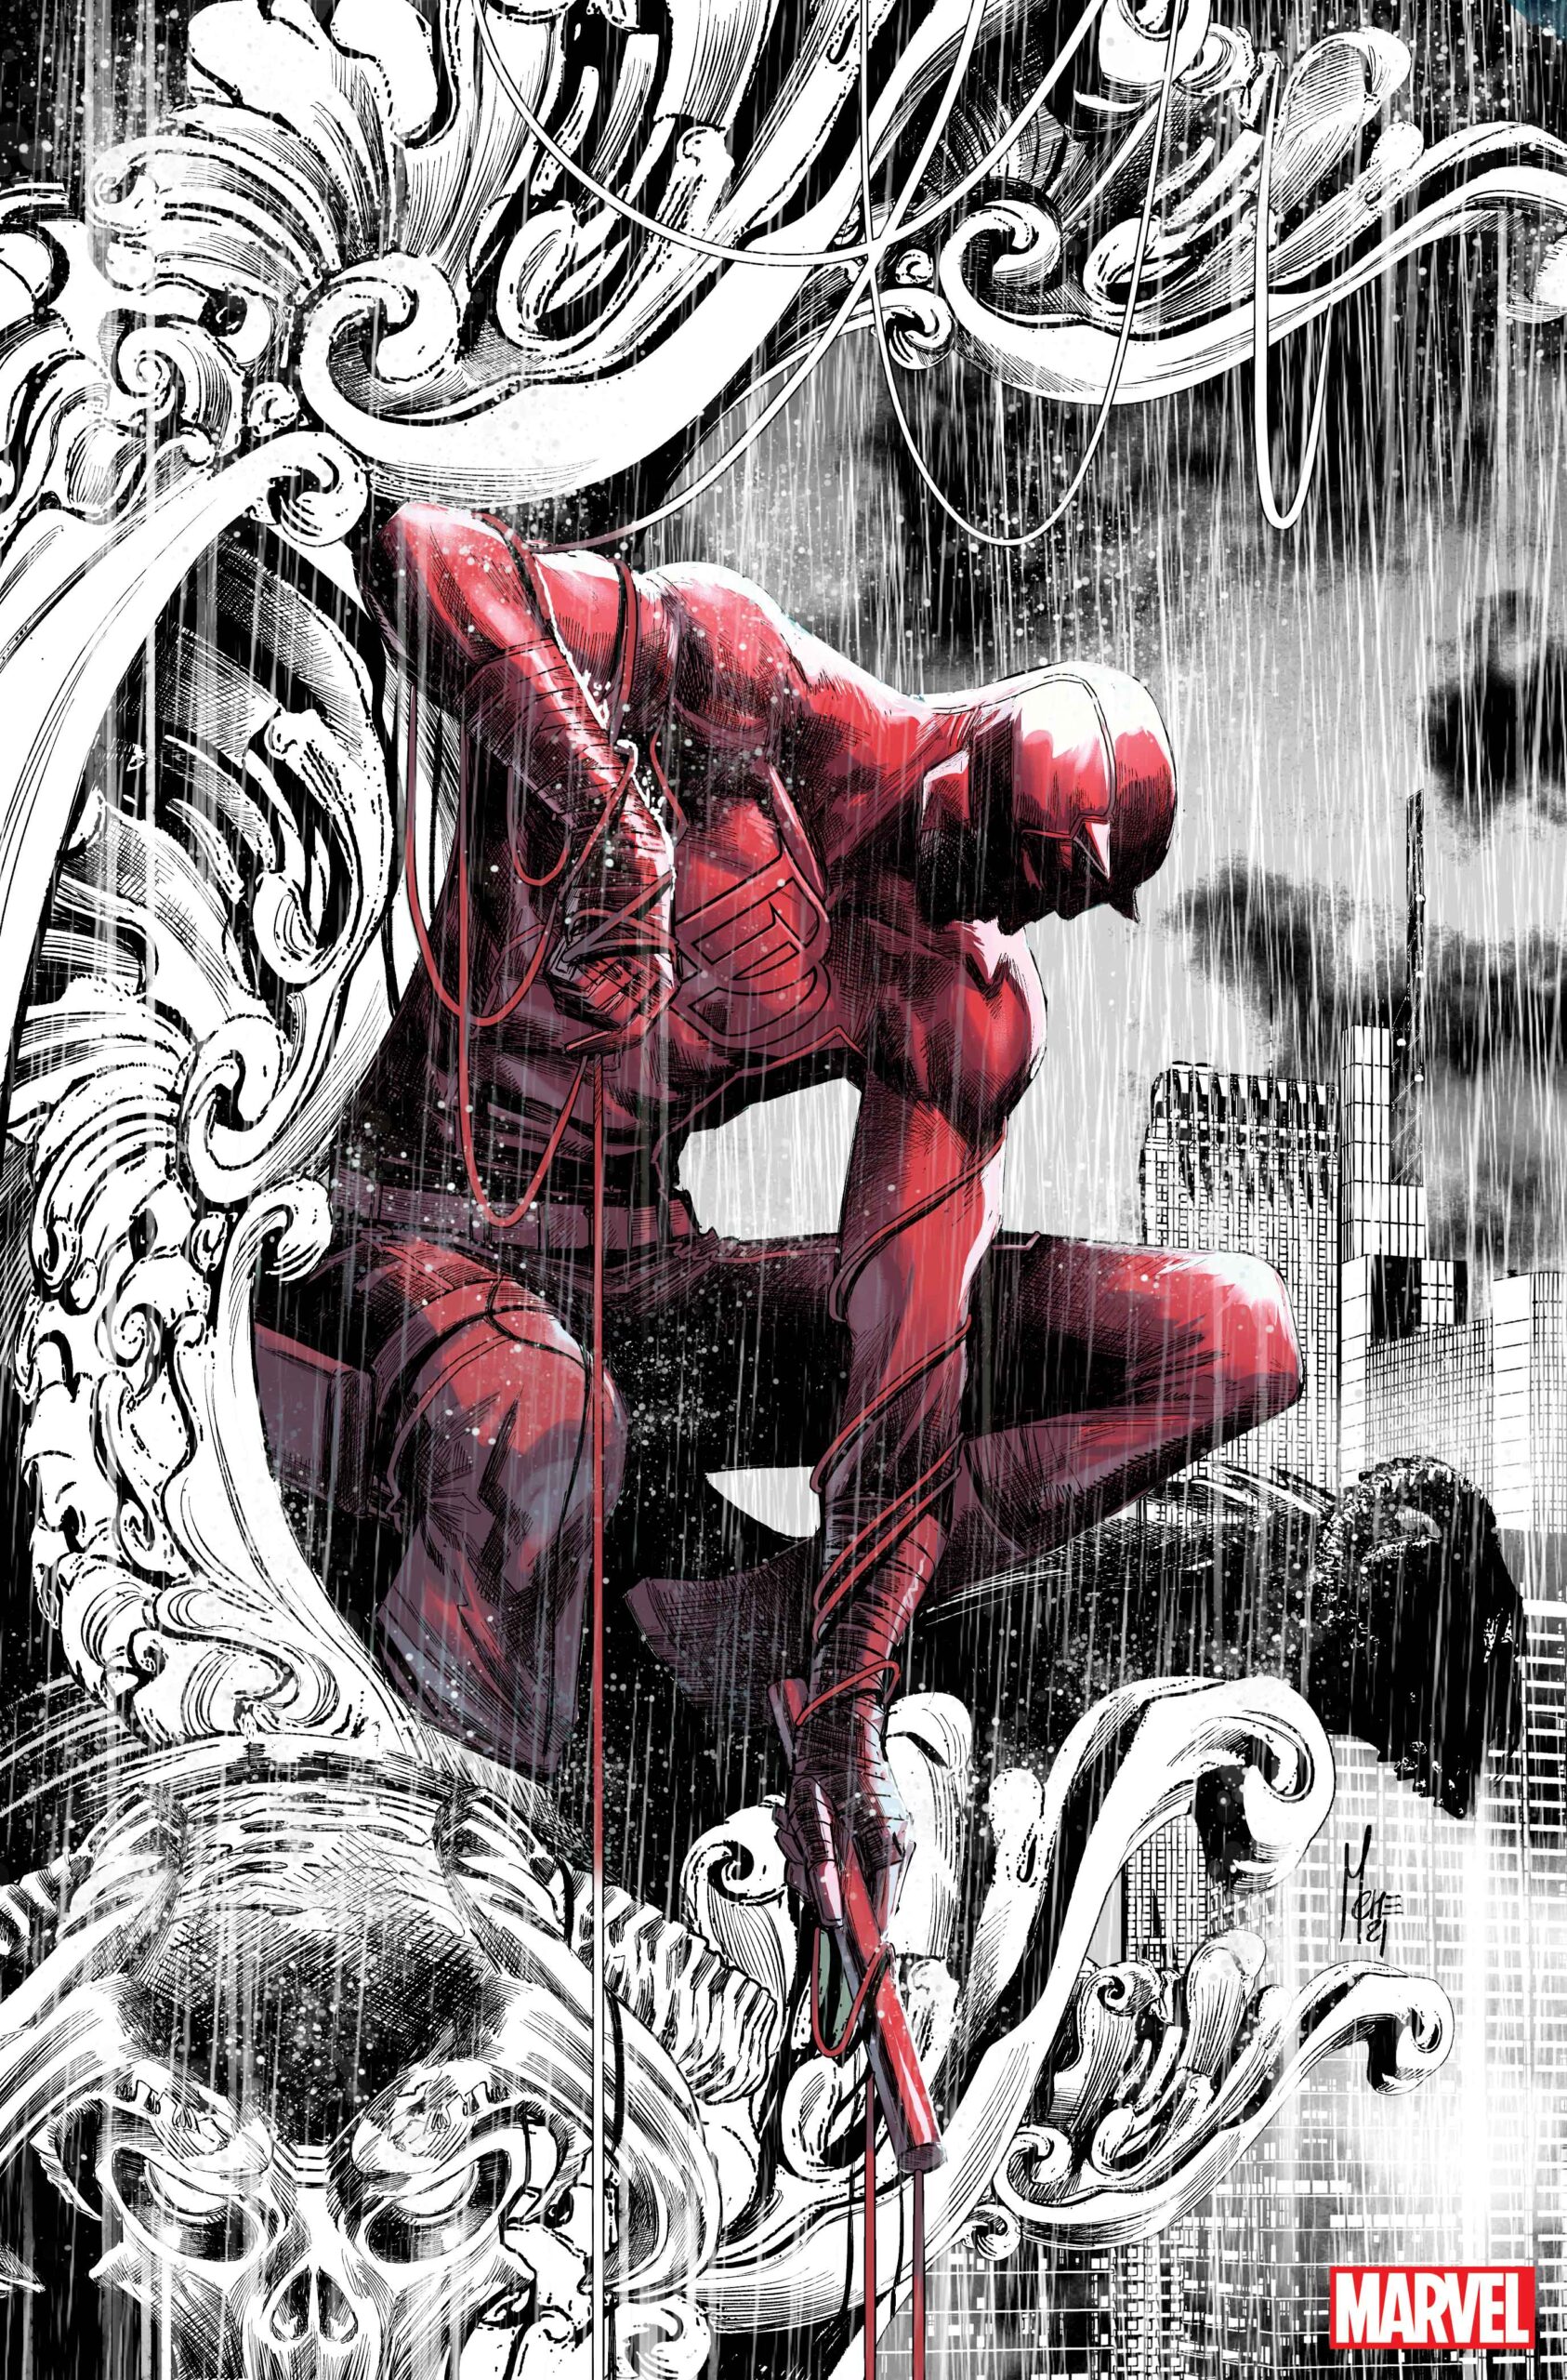 Daredevil in red against a white sketched backdrop variant available at San Diego Comic Con 2022. Drawn by Marco Checchetto and Matthew Wilson!